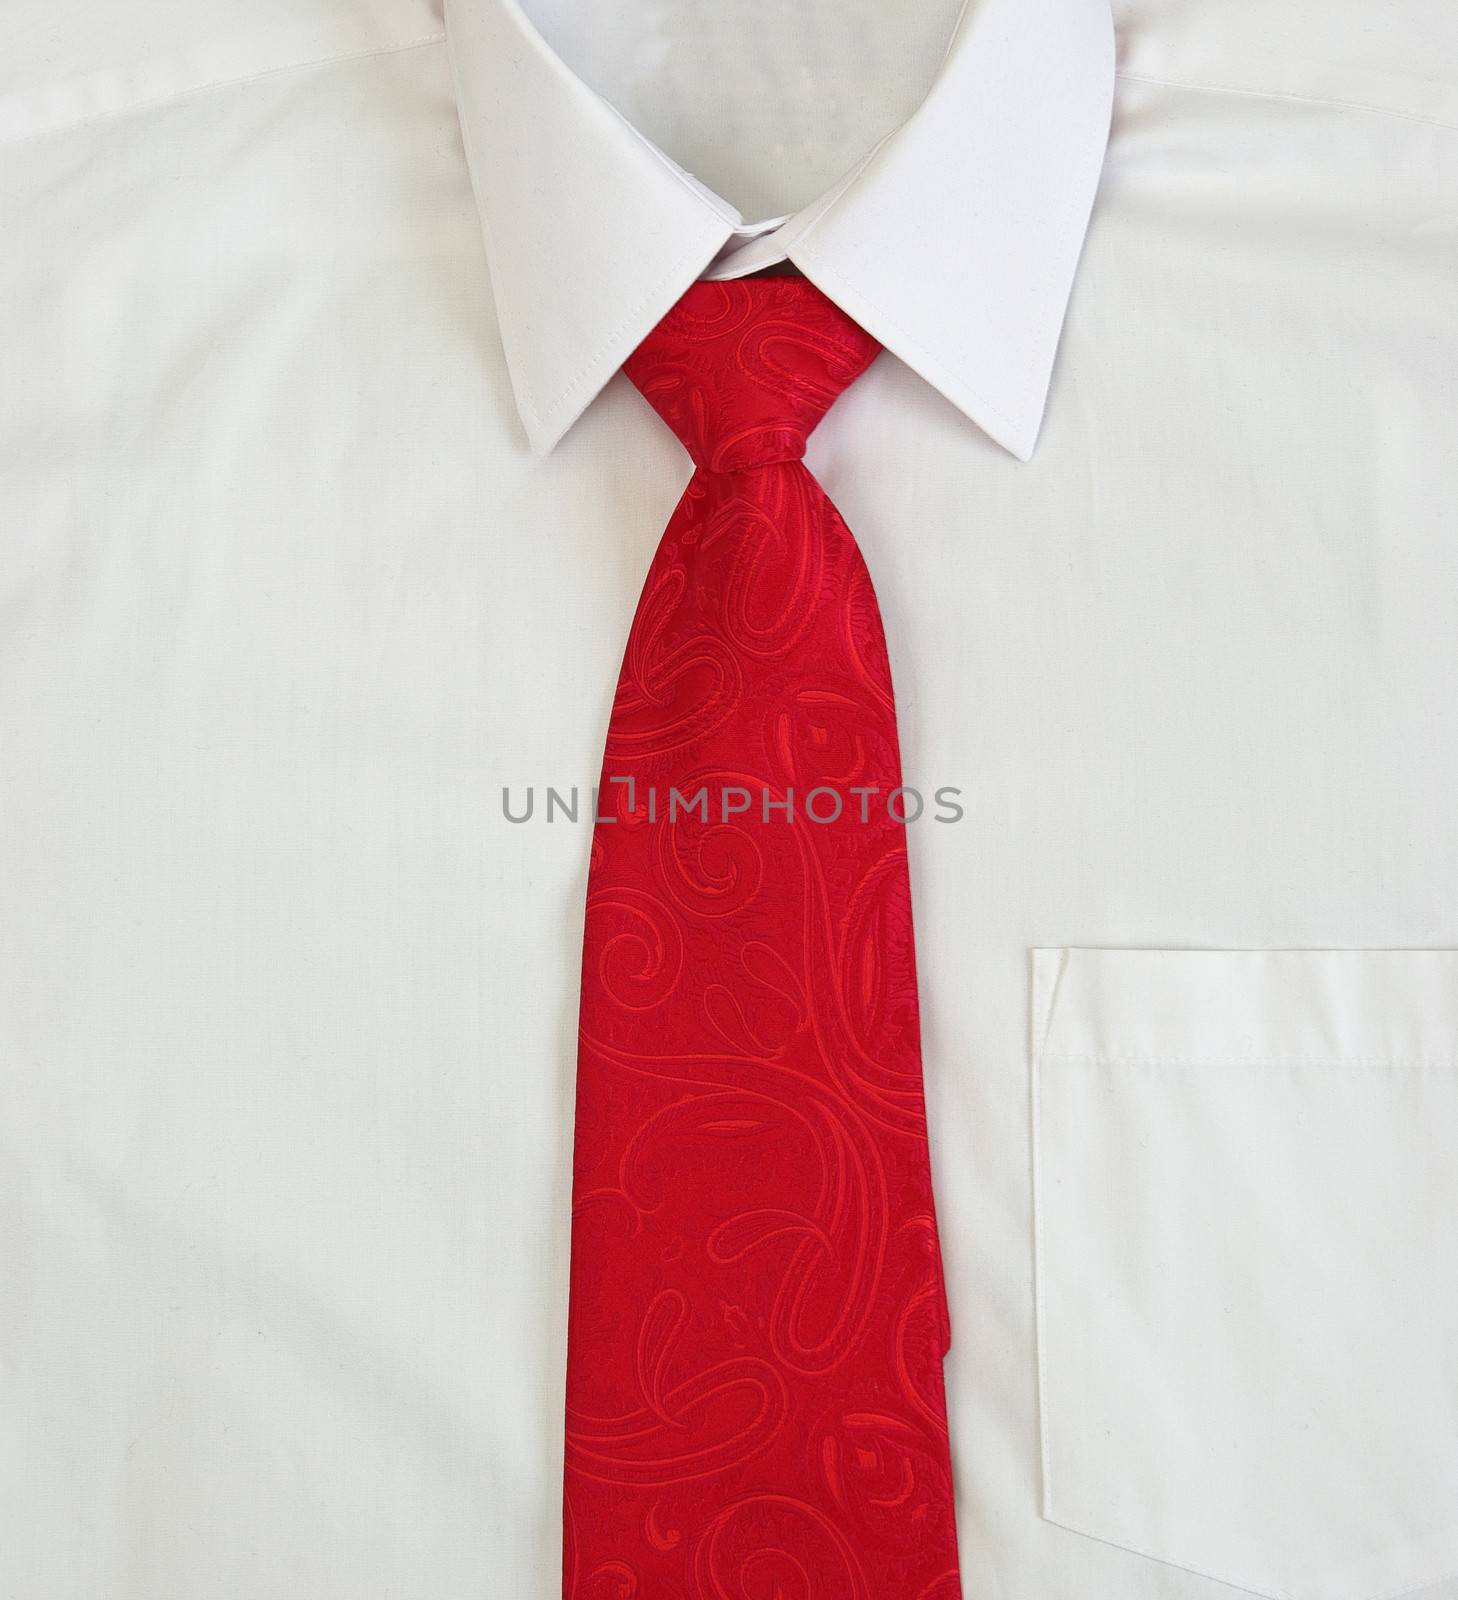 Shirt and tie by eans